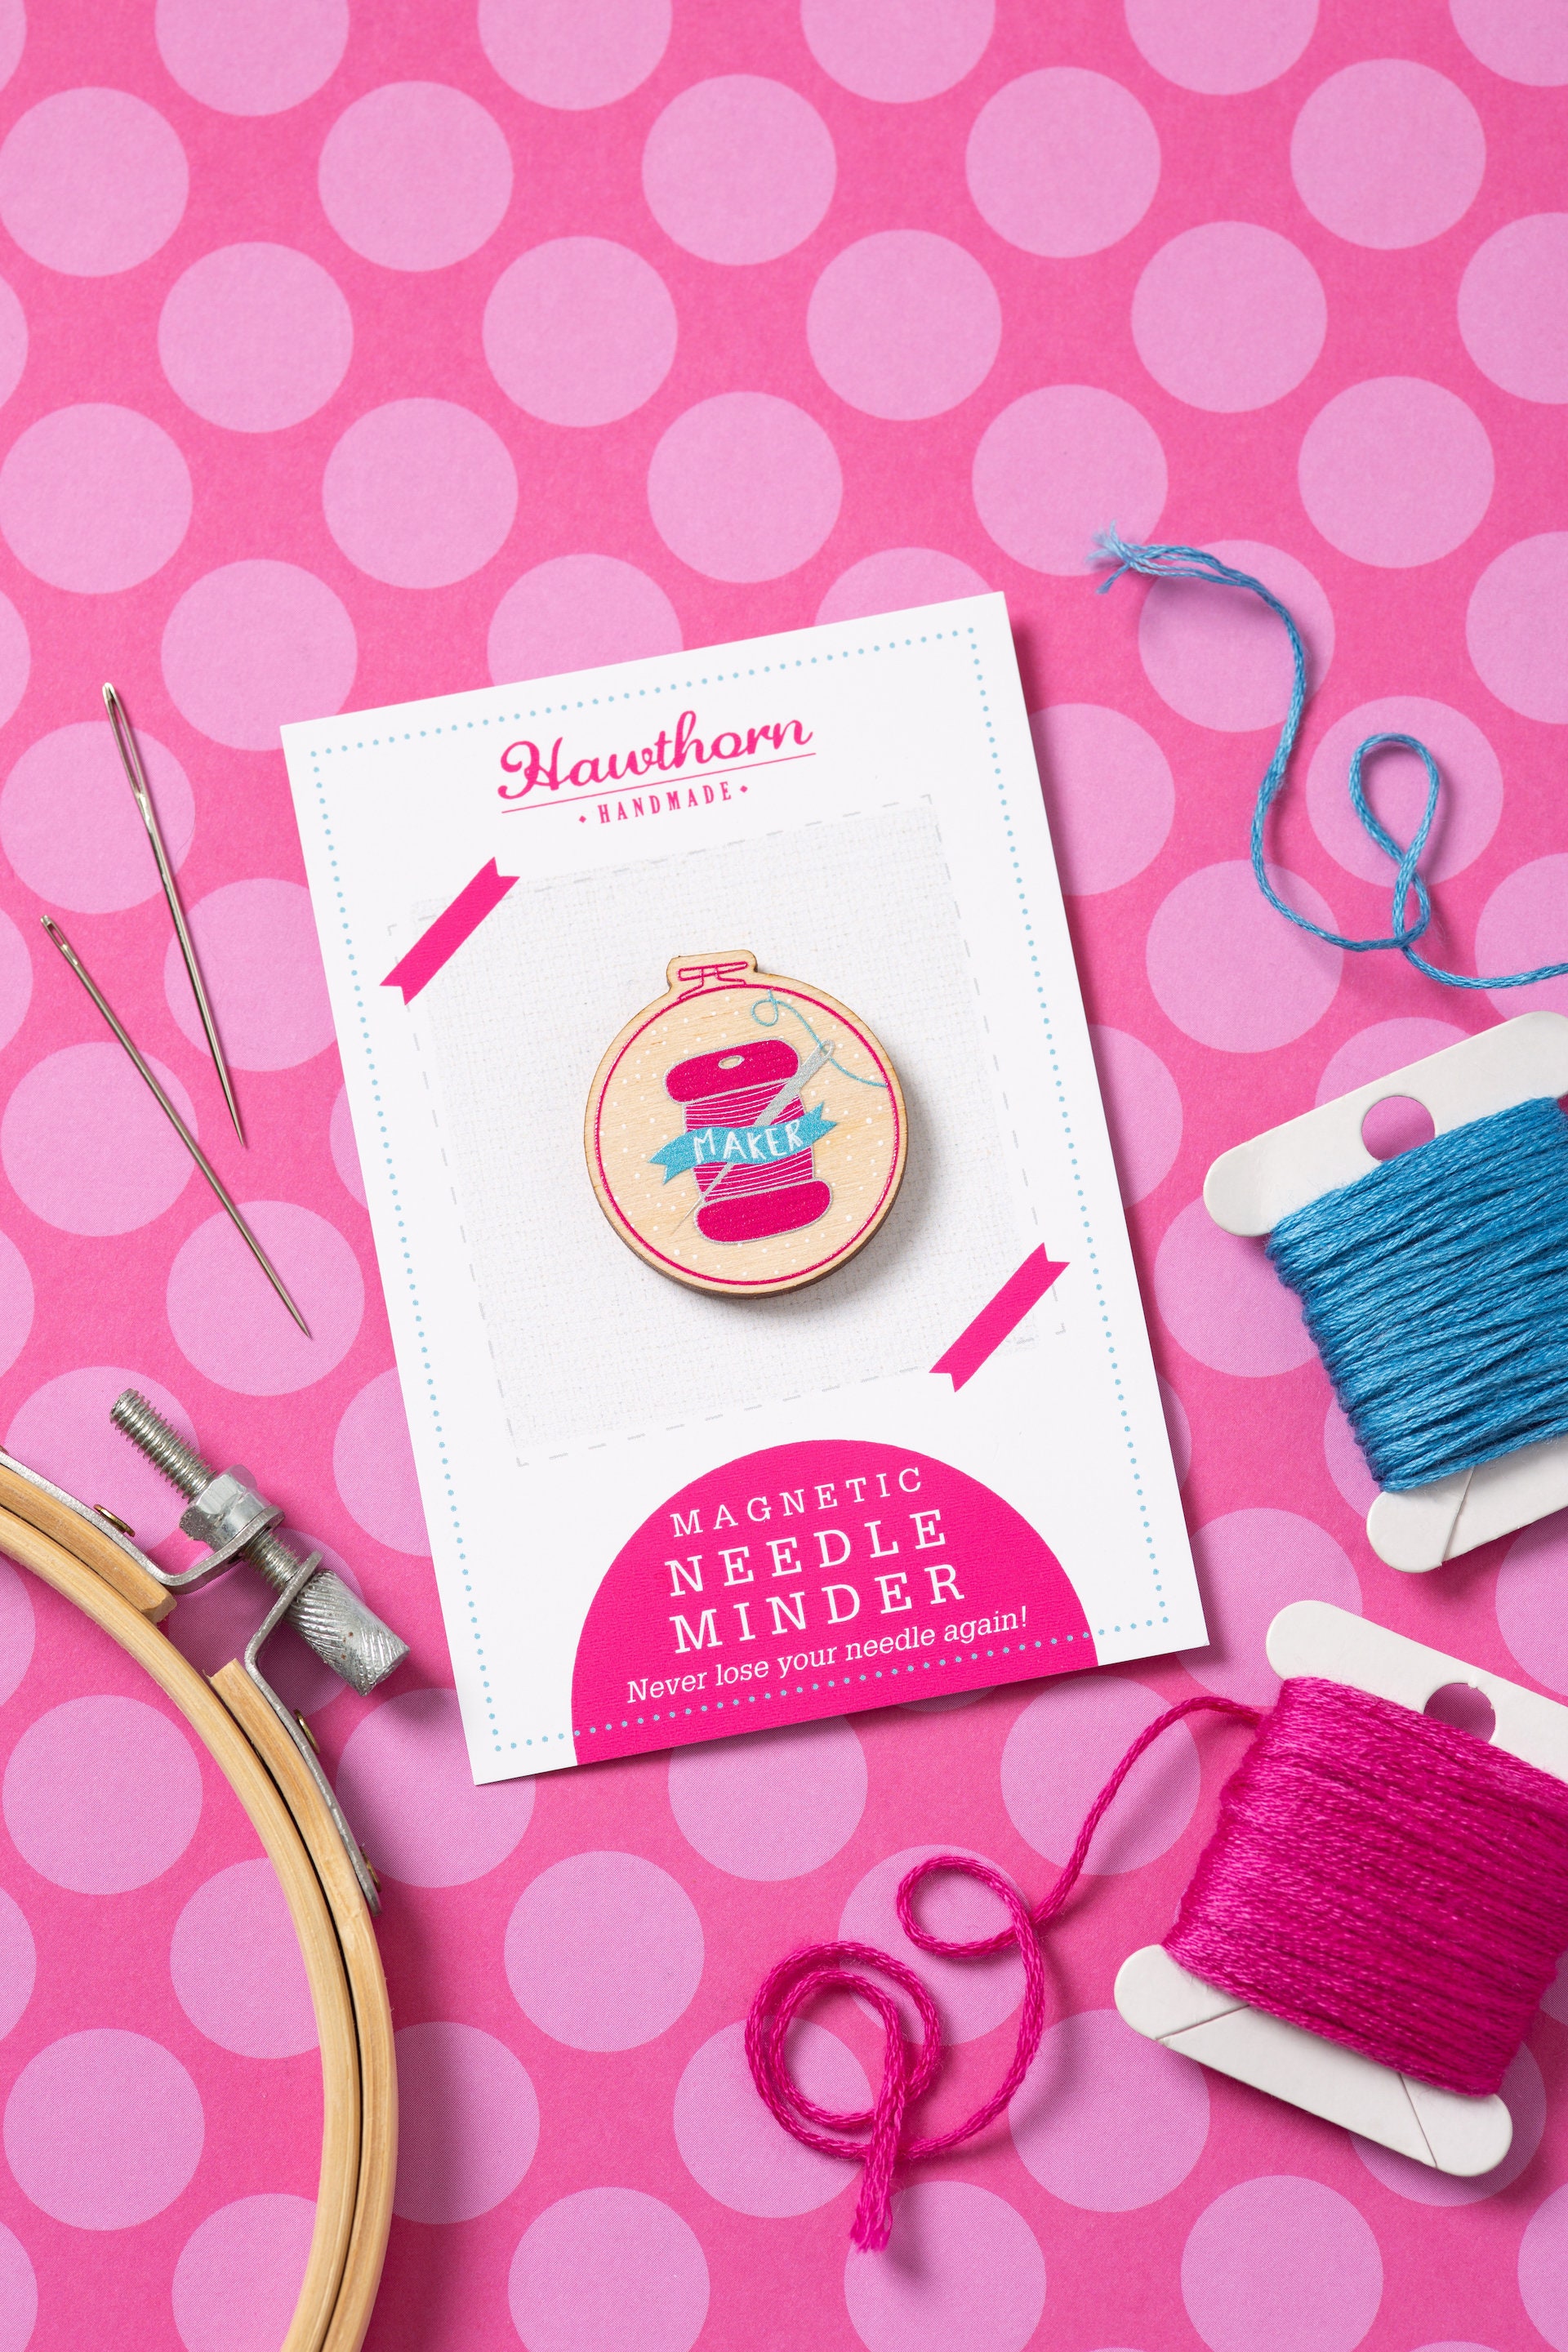 Needle Minder Magnets DIY! {How to Make Your Own in 5 Minutes}